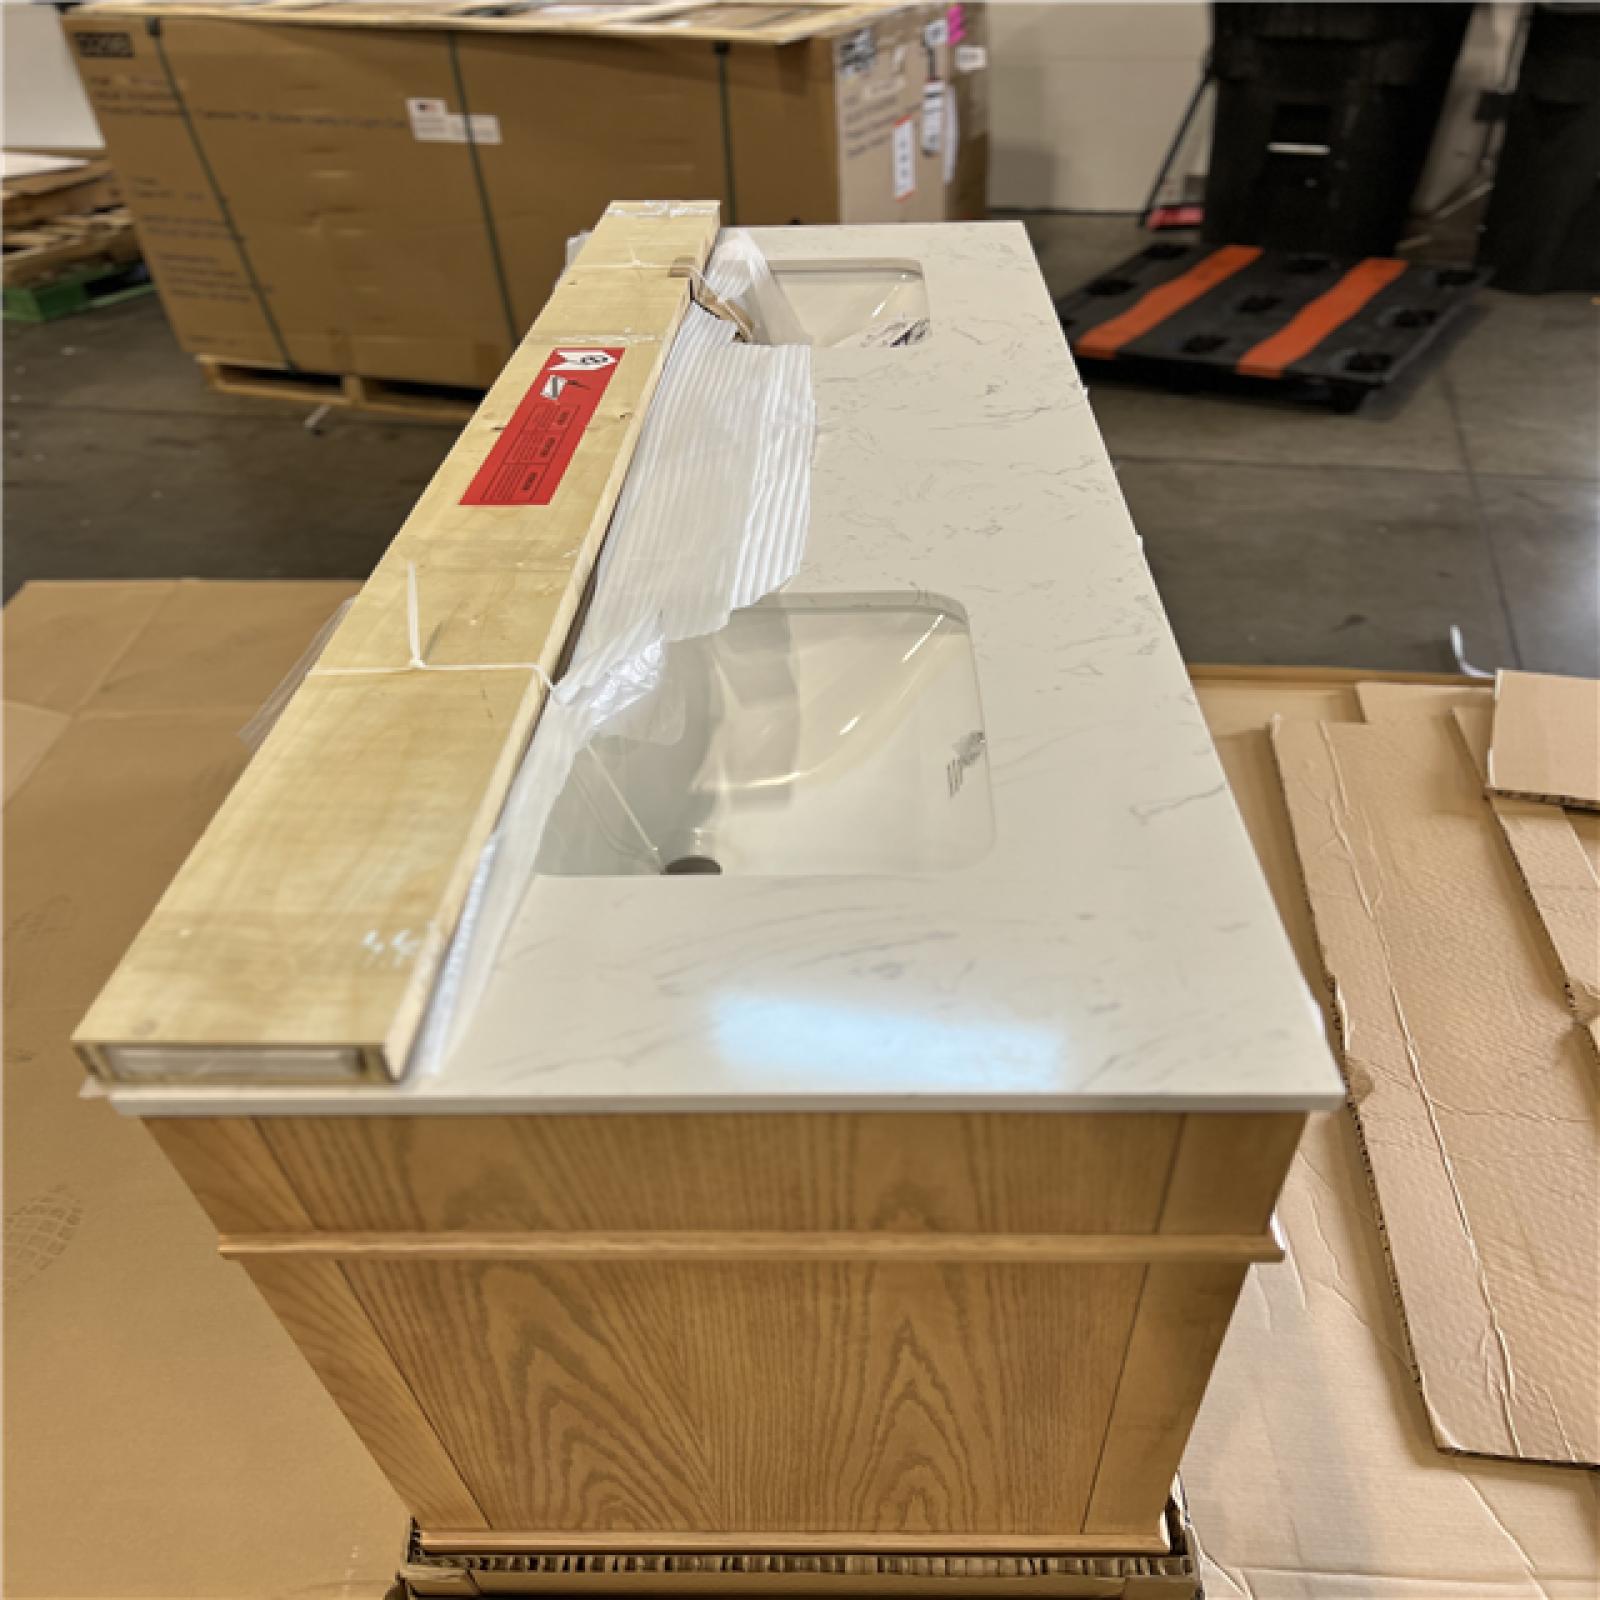 DALLAS LOCATION - Home Decorators Collection Talmore 72 in W x 22 in D x 35 in H Double Sink Bath Vanity in Light Oak With White Engineered Marble Top